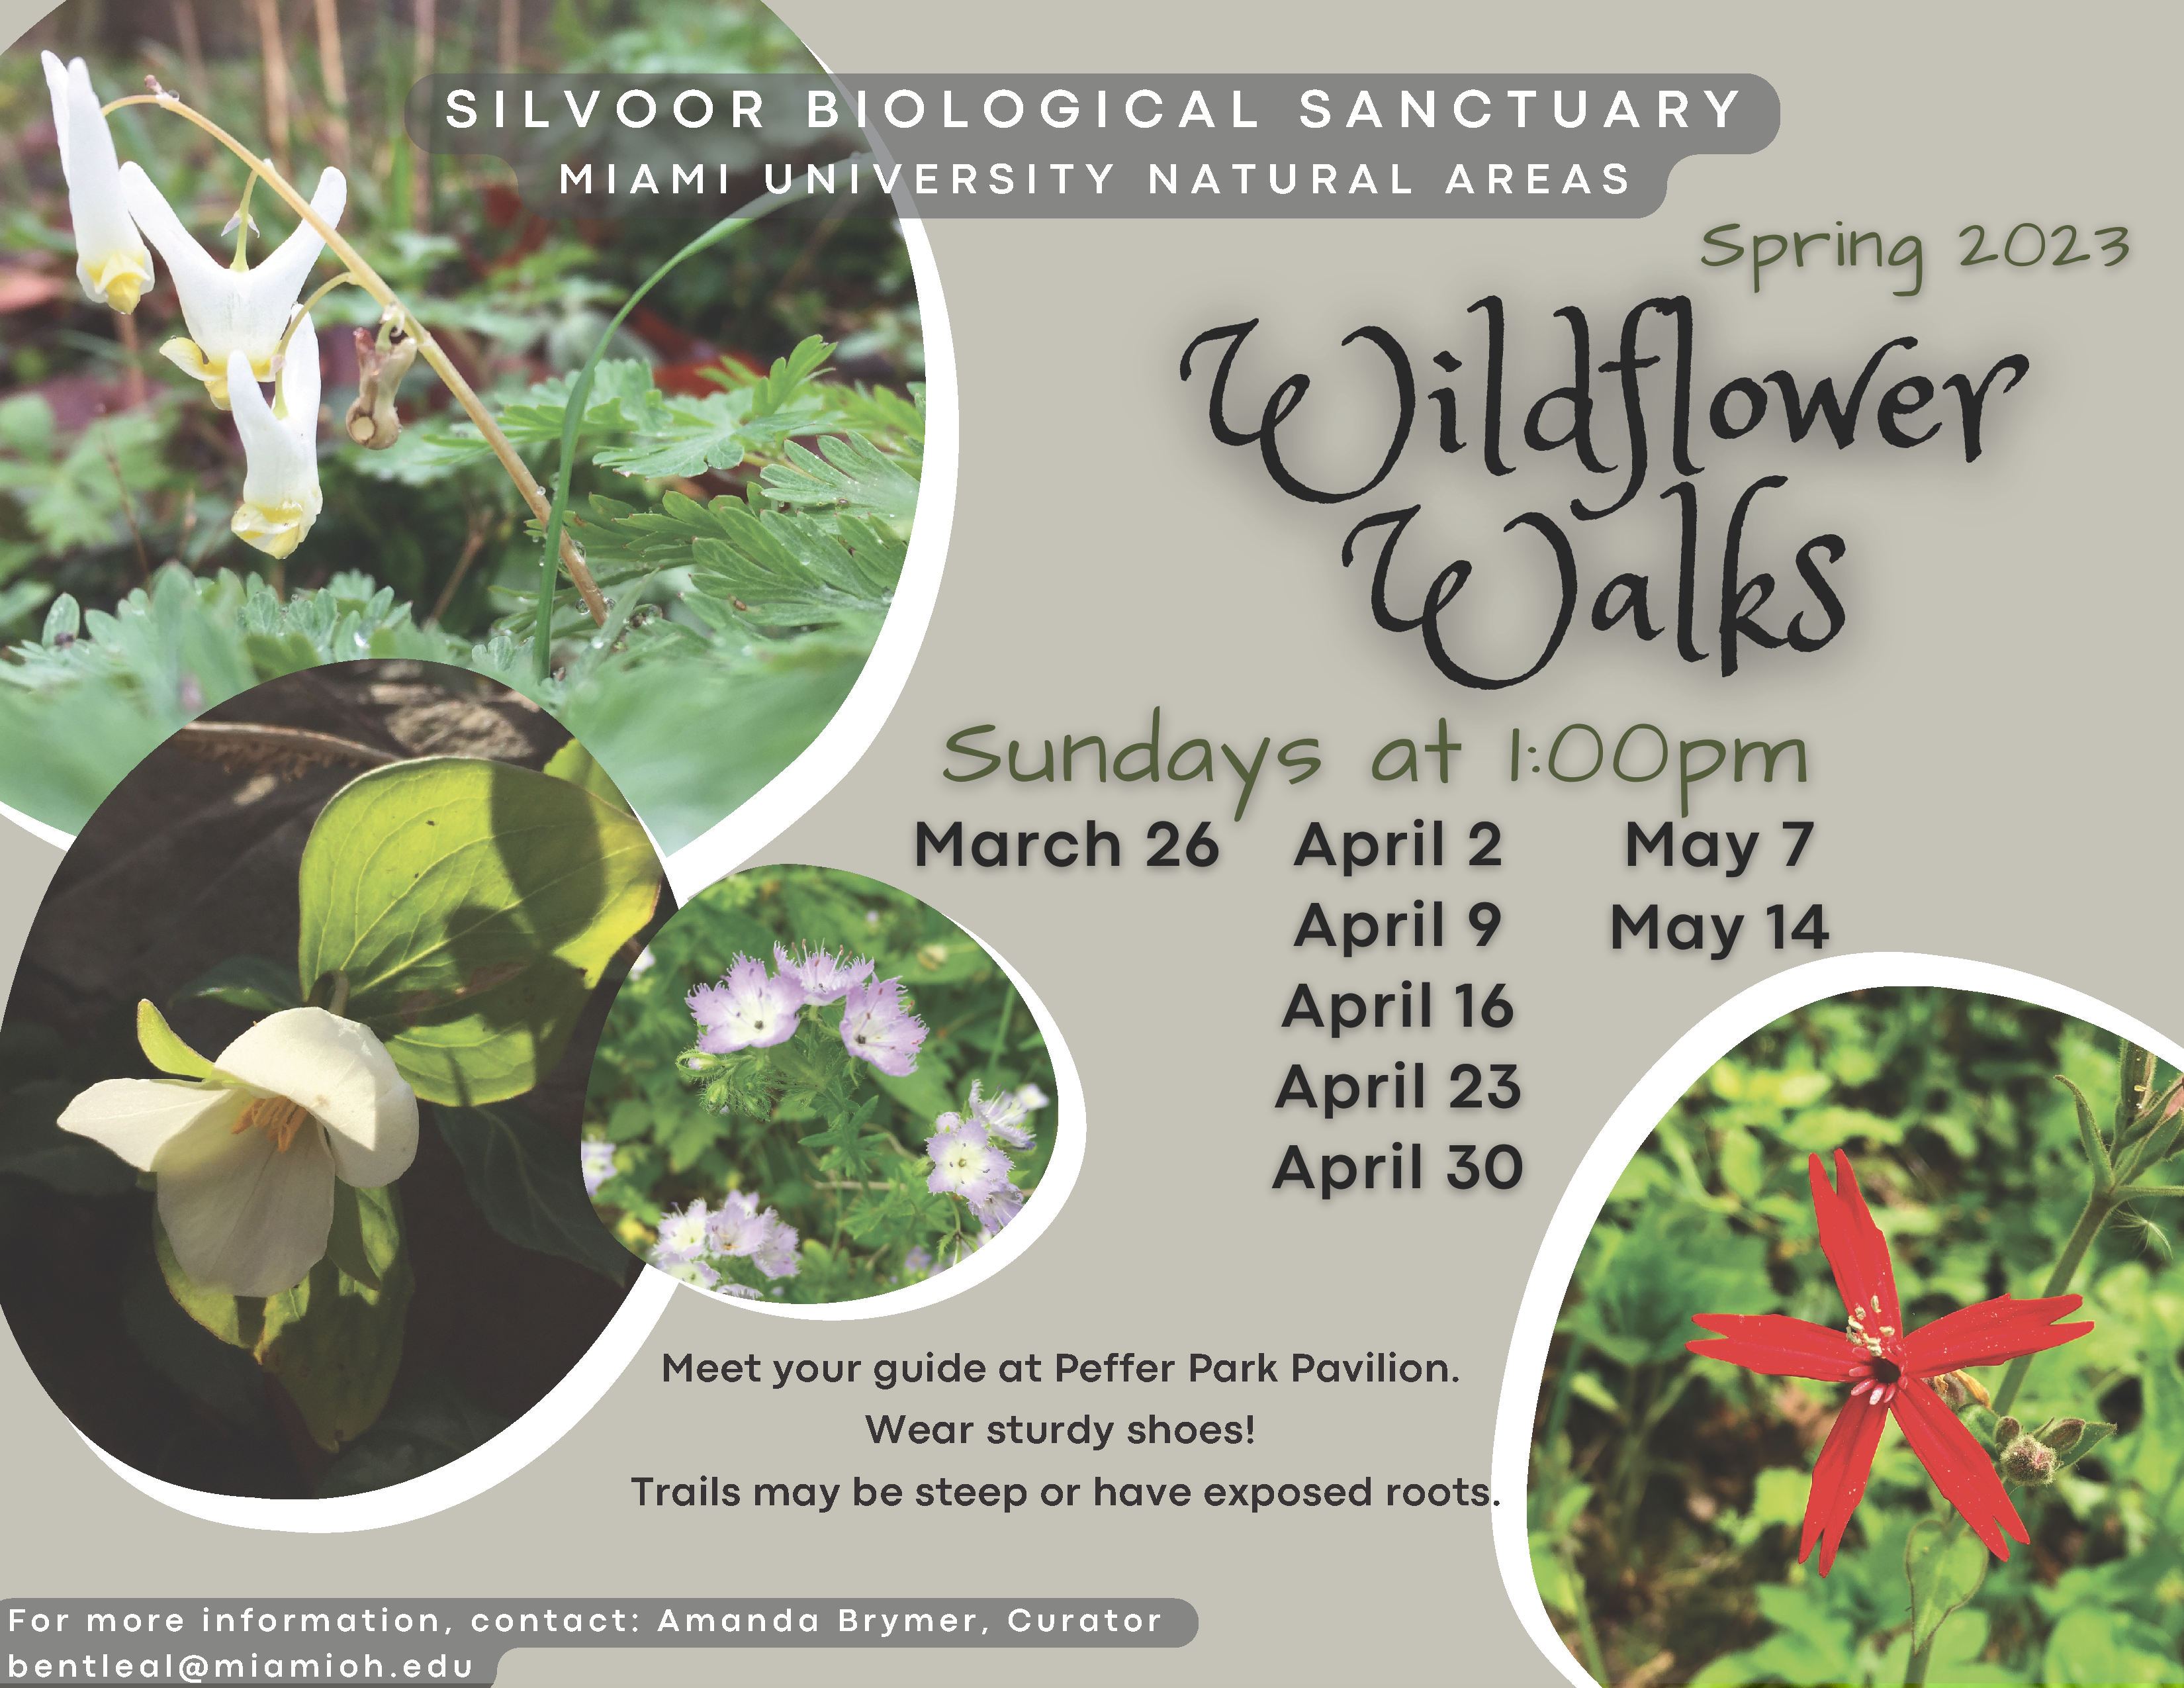 Spring Wildflower Walks. Sundays at 1 p.m. March 26 - May 14. Meet your guide at the Peffer Park Pavilion. Contact: Amanda Brymer, bentleal@miamioh.edu